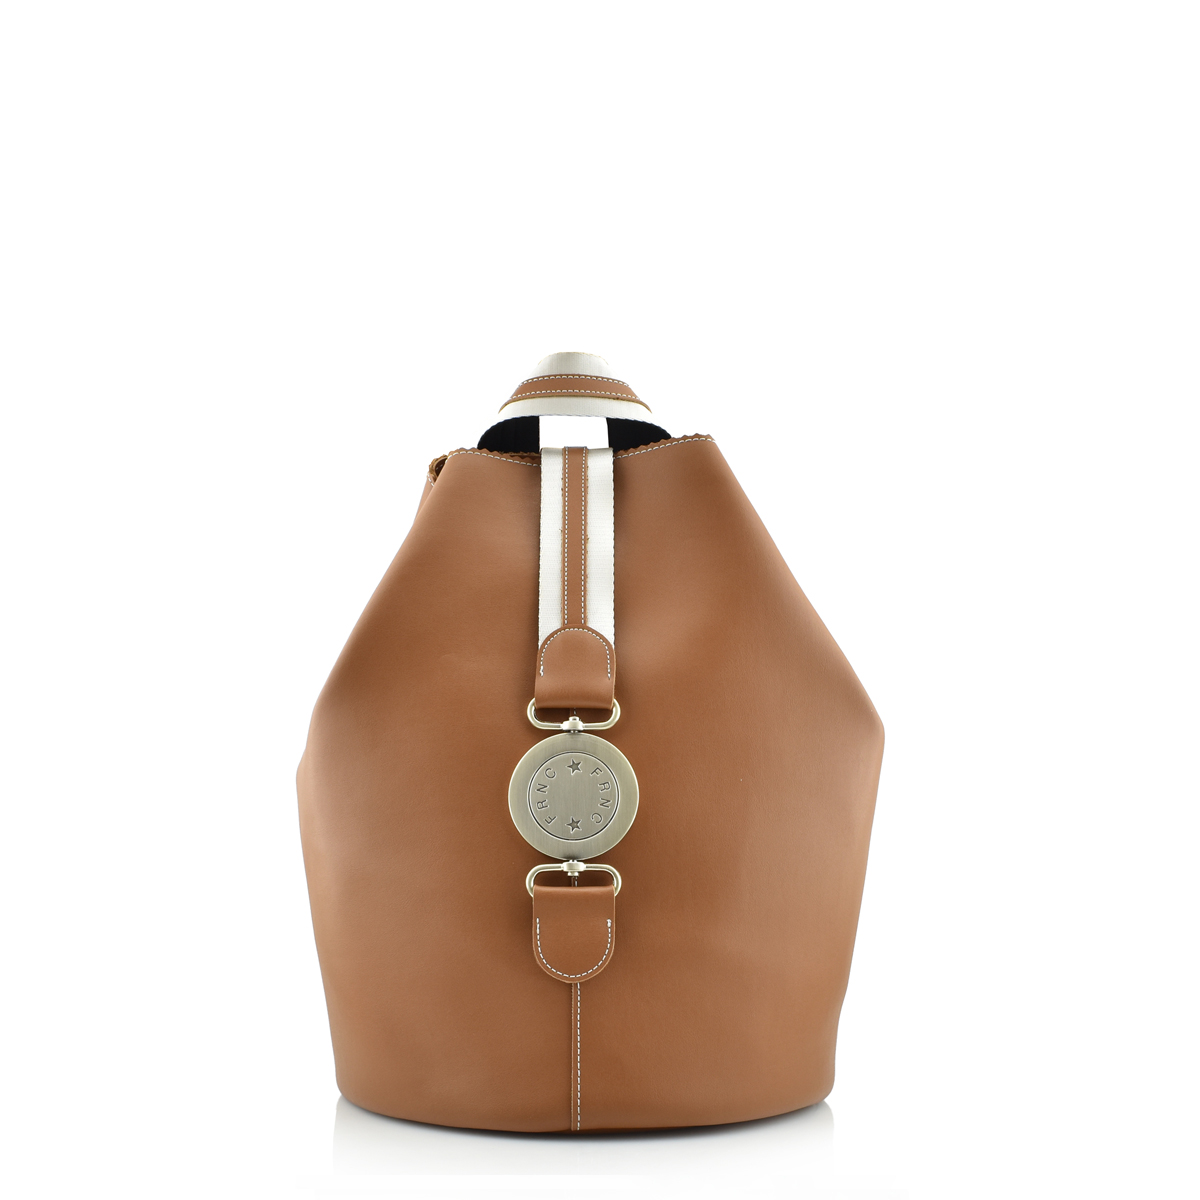 FRNC - FRANCESCO SMALL CLASSIC POUCH BACKPACK - 562-TAN